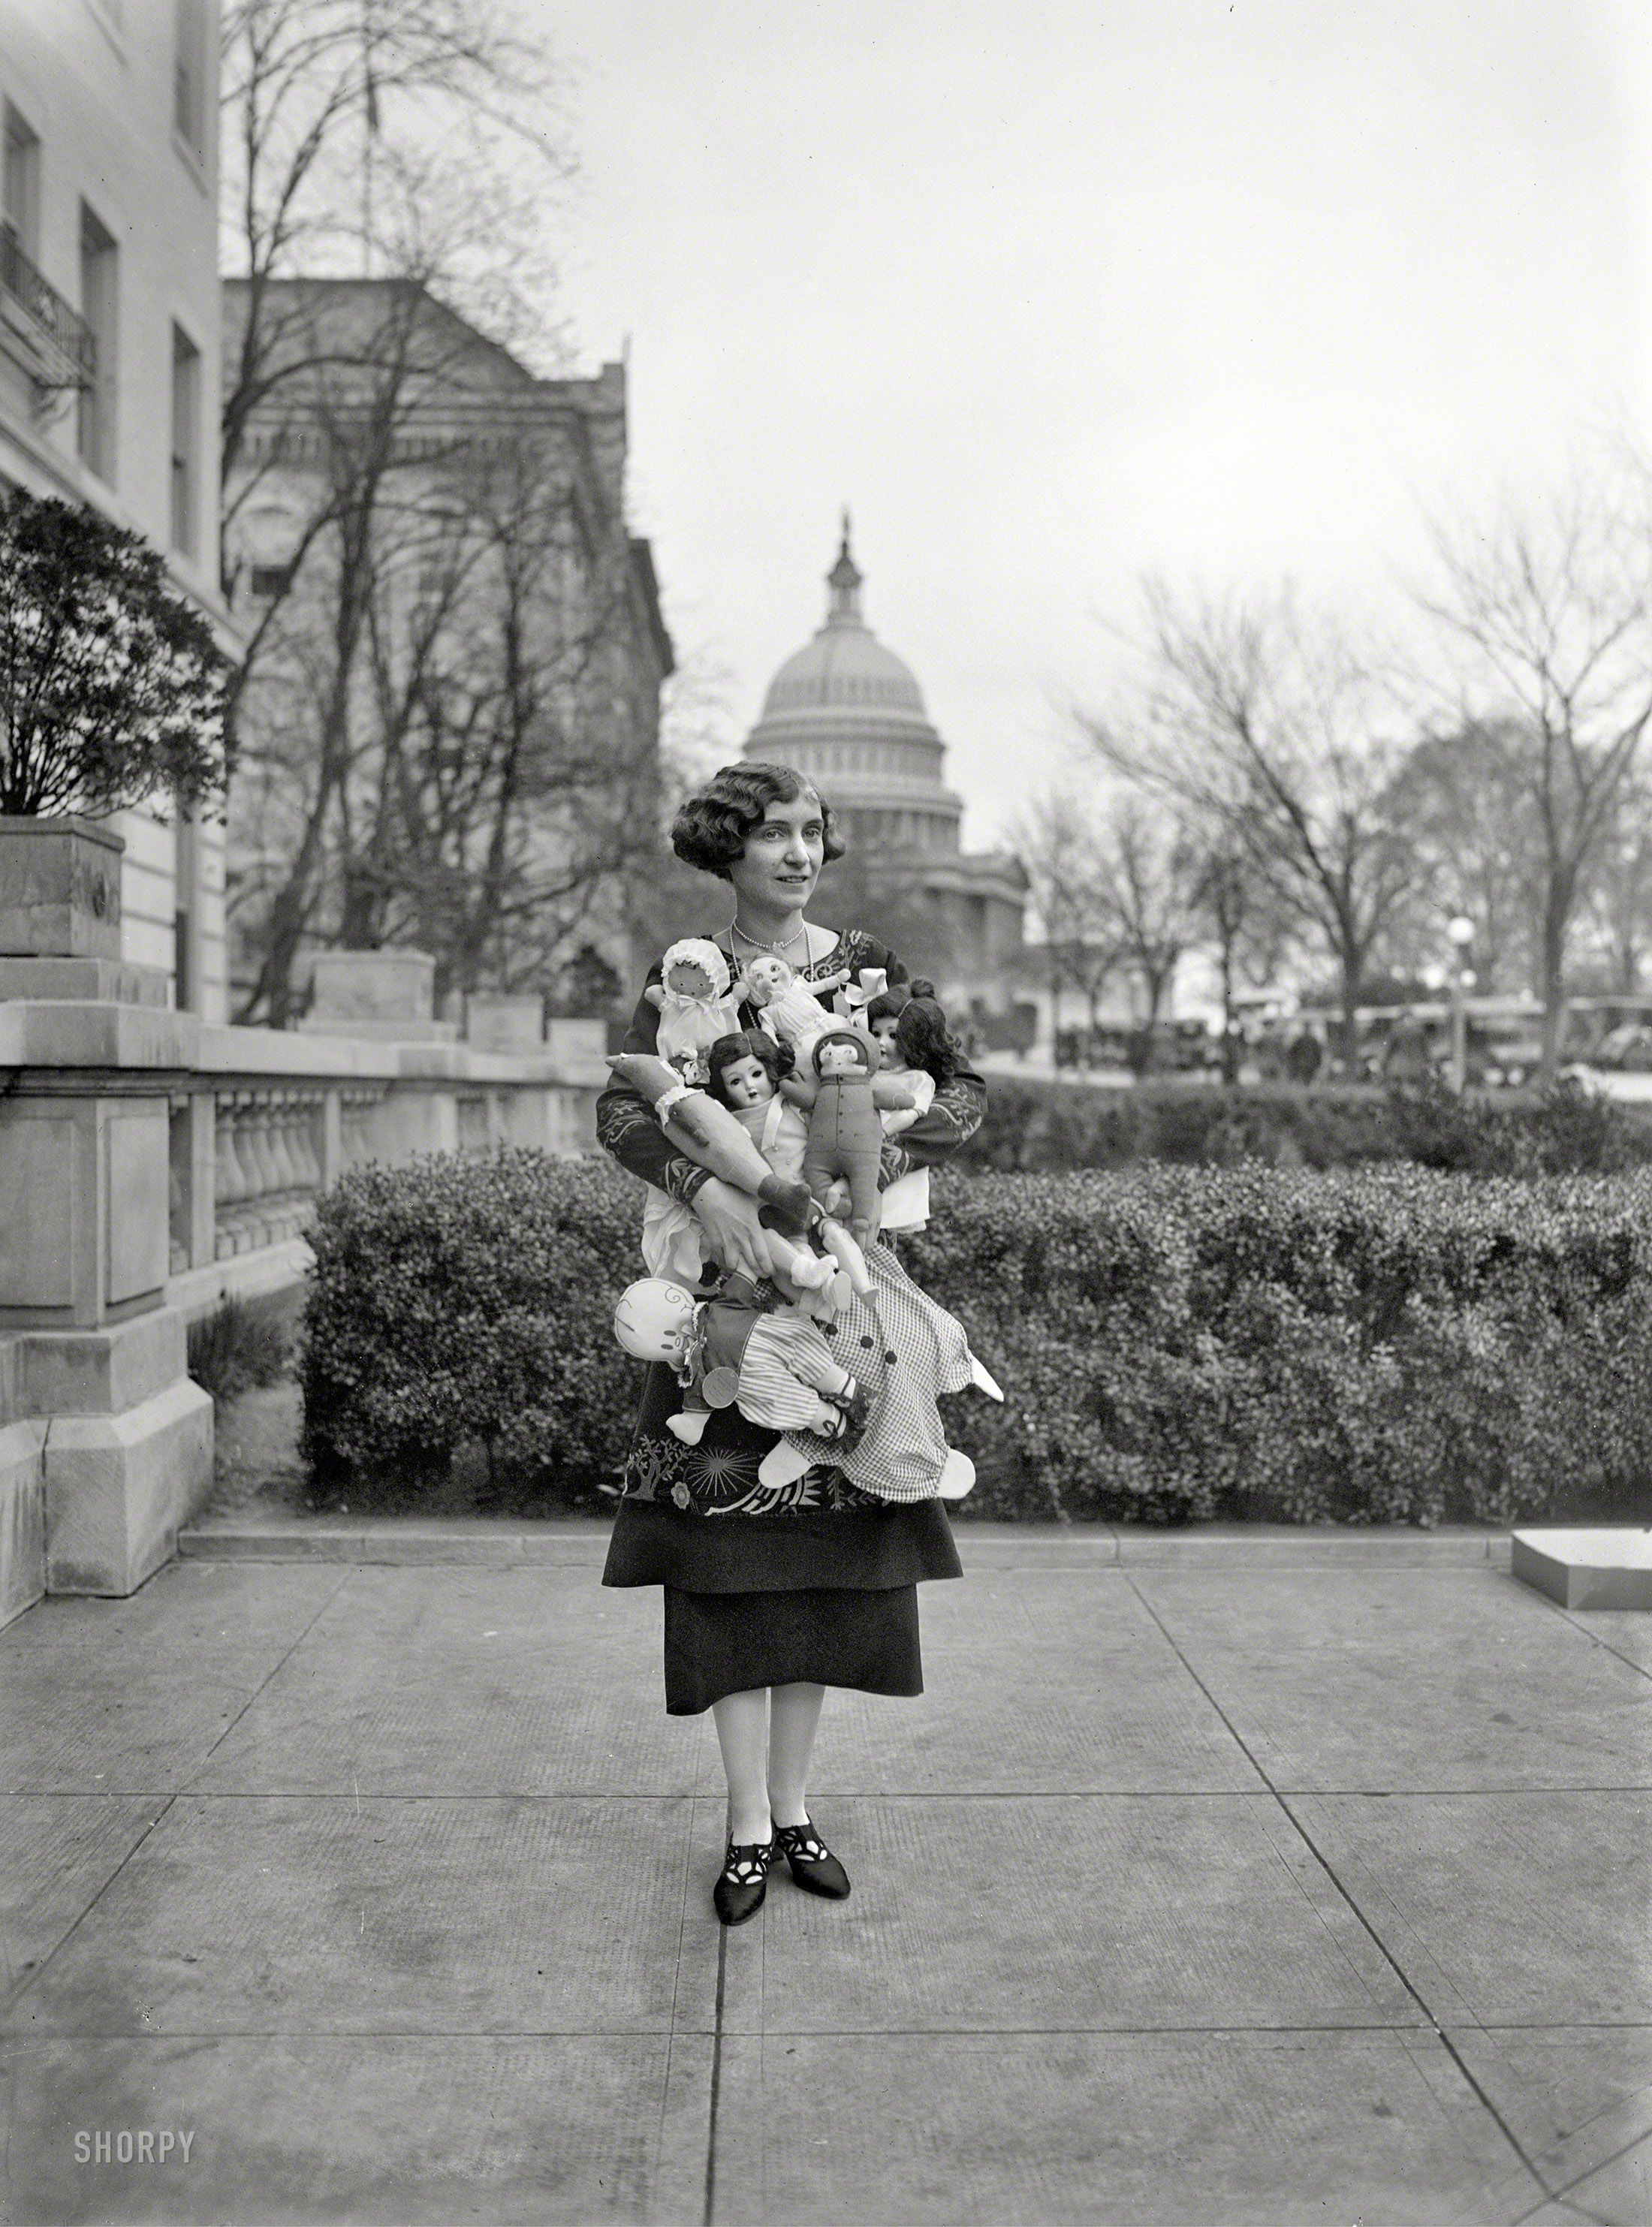 1925. "Miss Virginia S. Caldwell of Carbondale, Ill." Visiting Washington with her family. National Photo Company Collection glass negative. View full size.